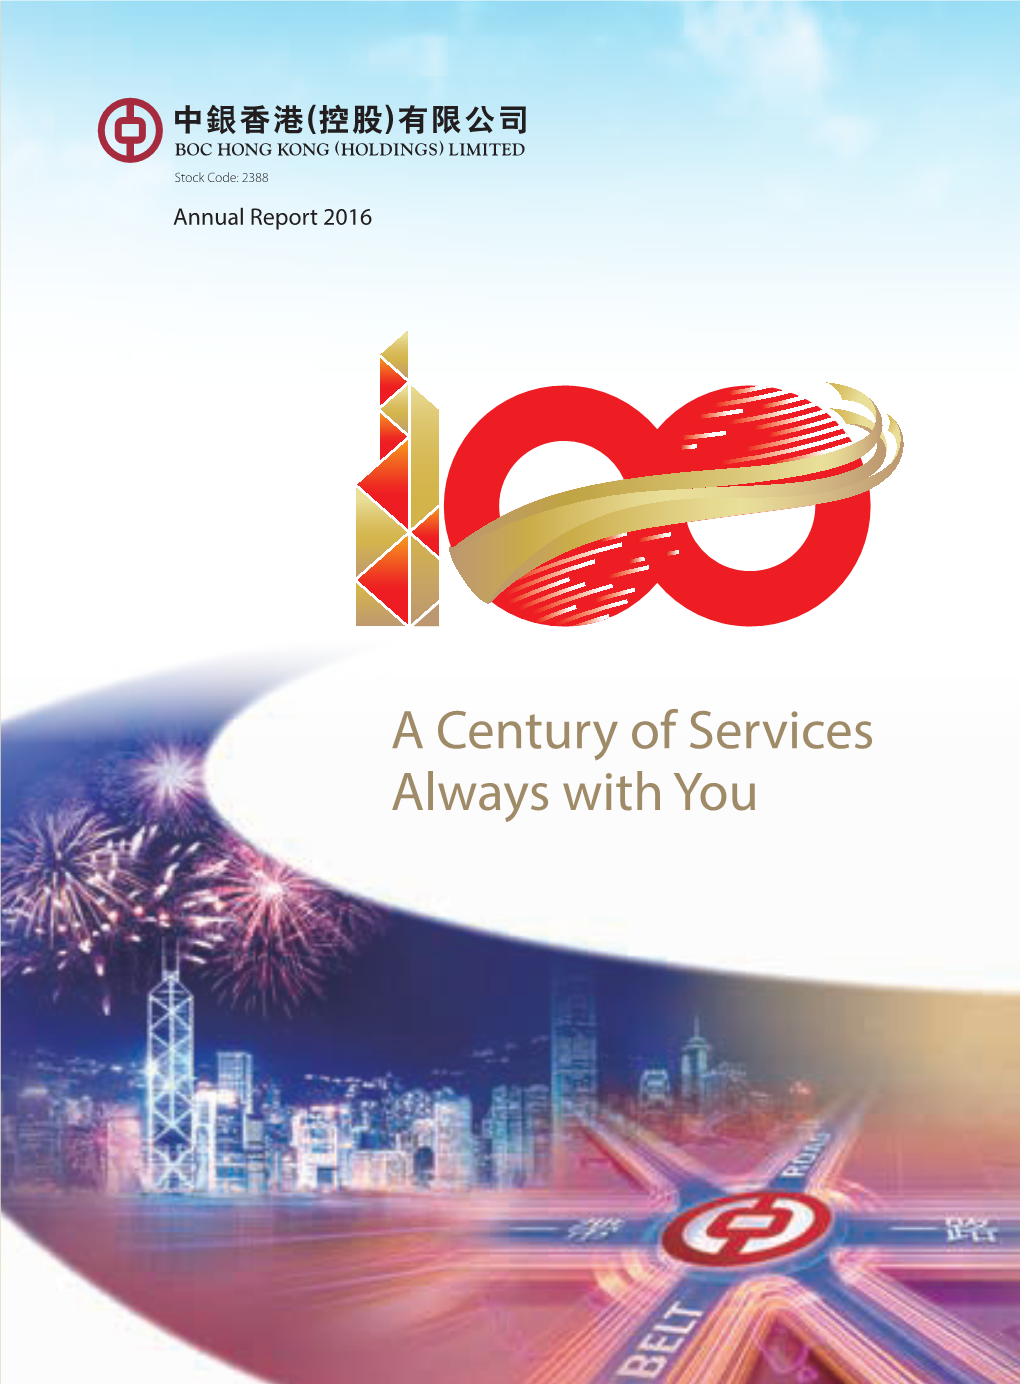 A Century of Services Always With